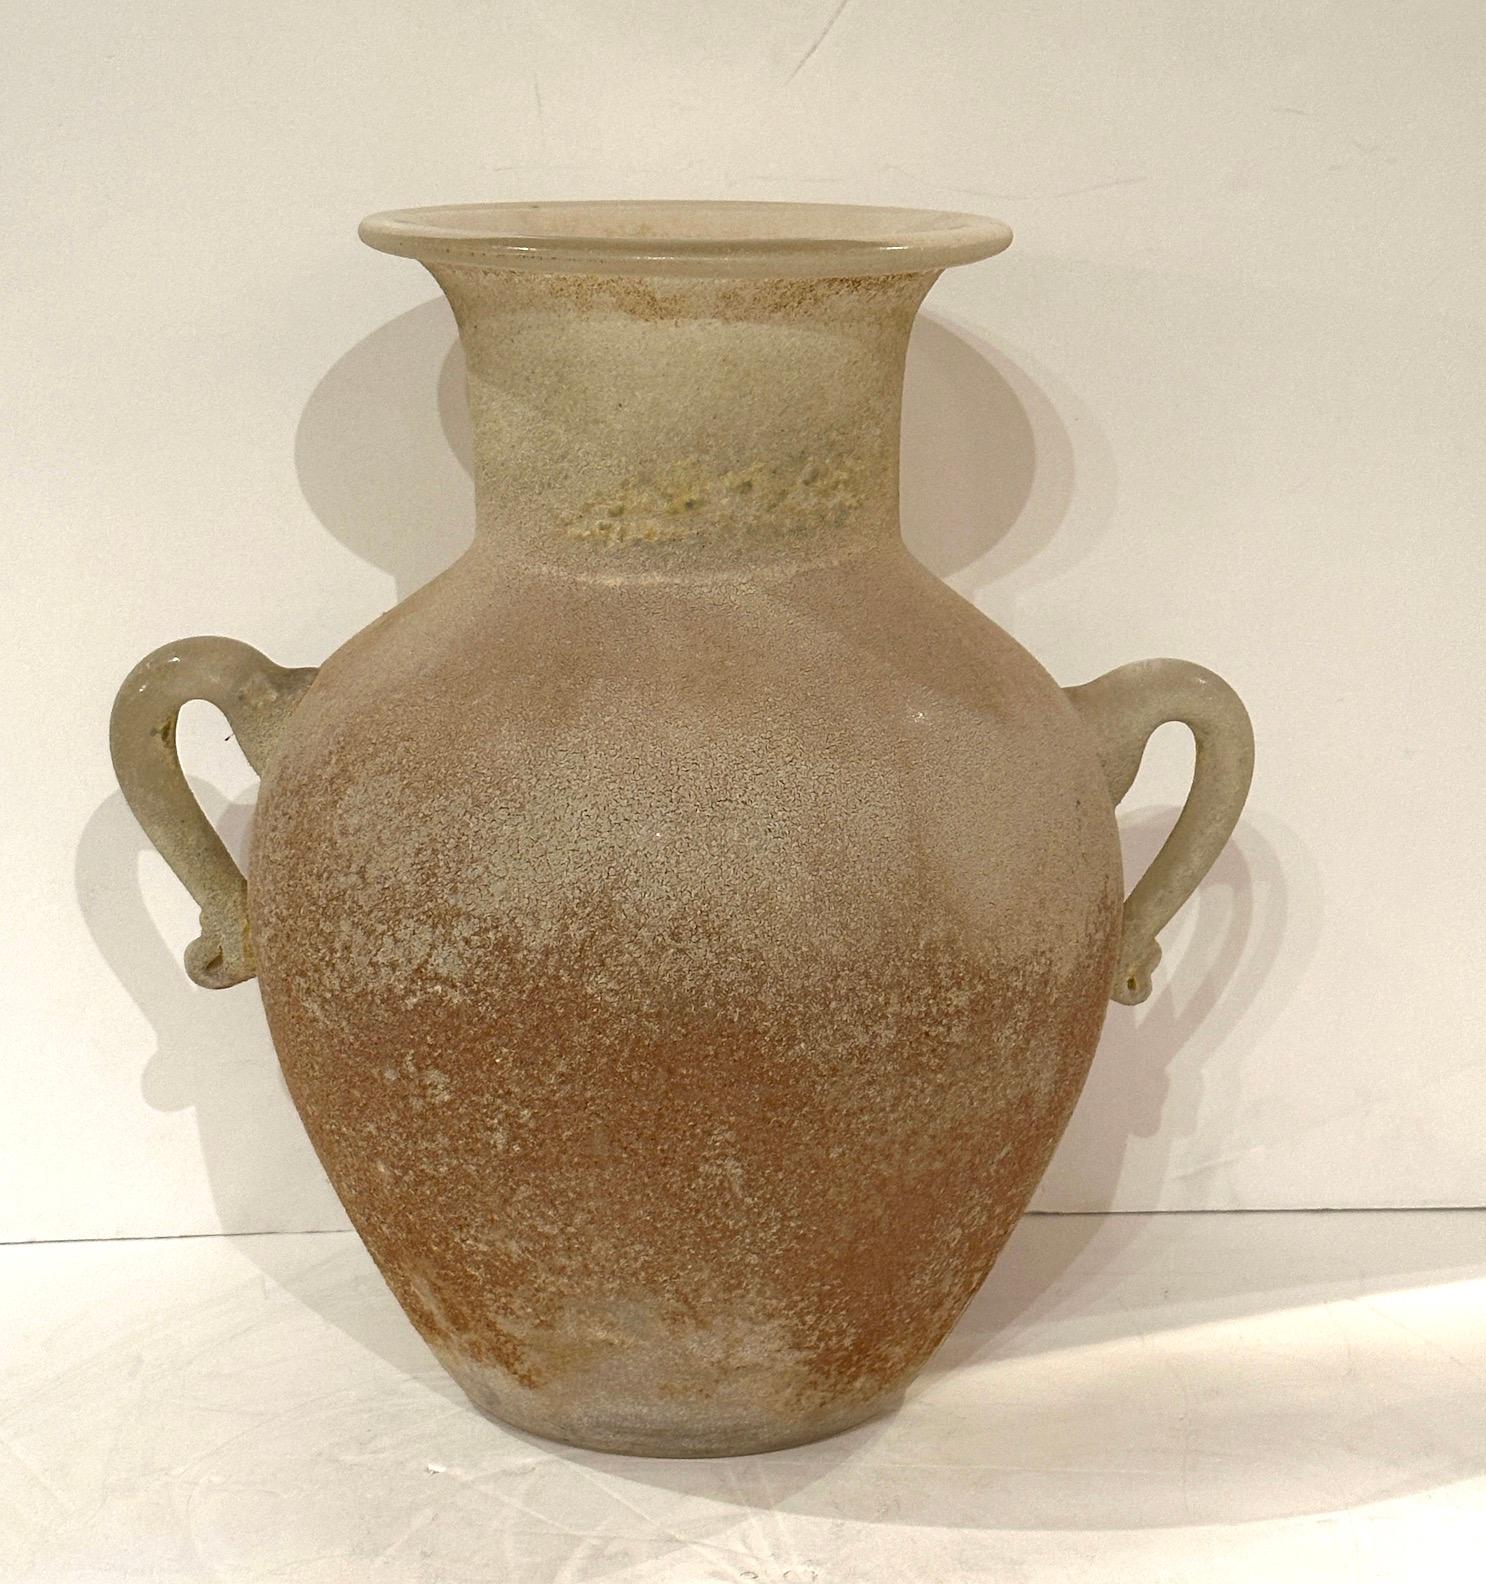 A Roman glass, Grand Tour style handled urn.  Late 19th/early 20th century.